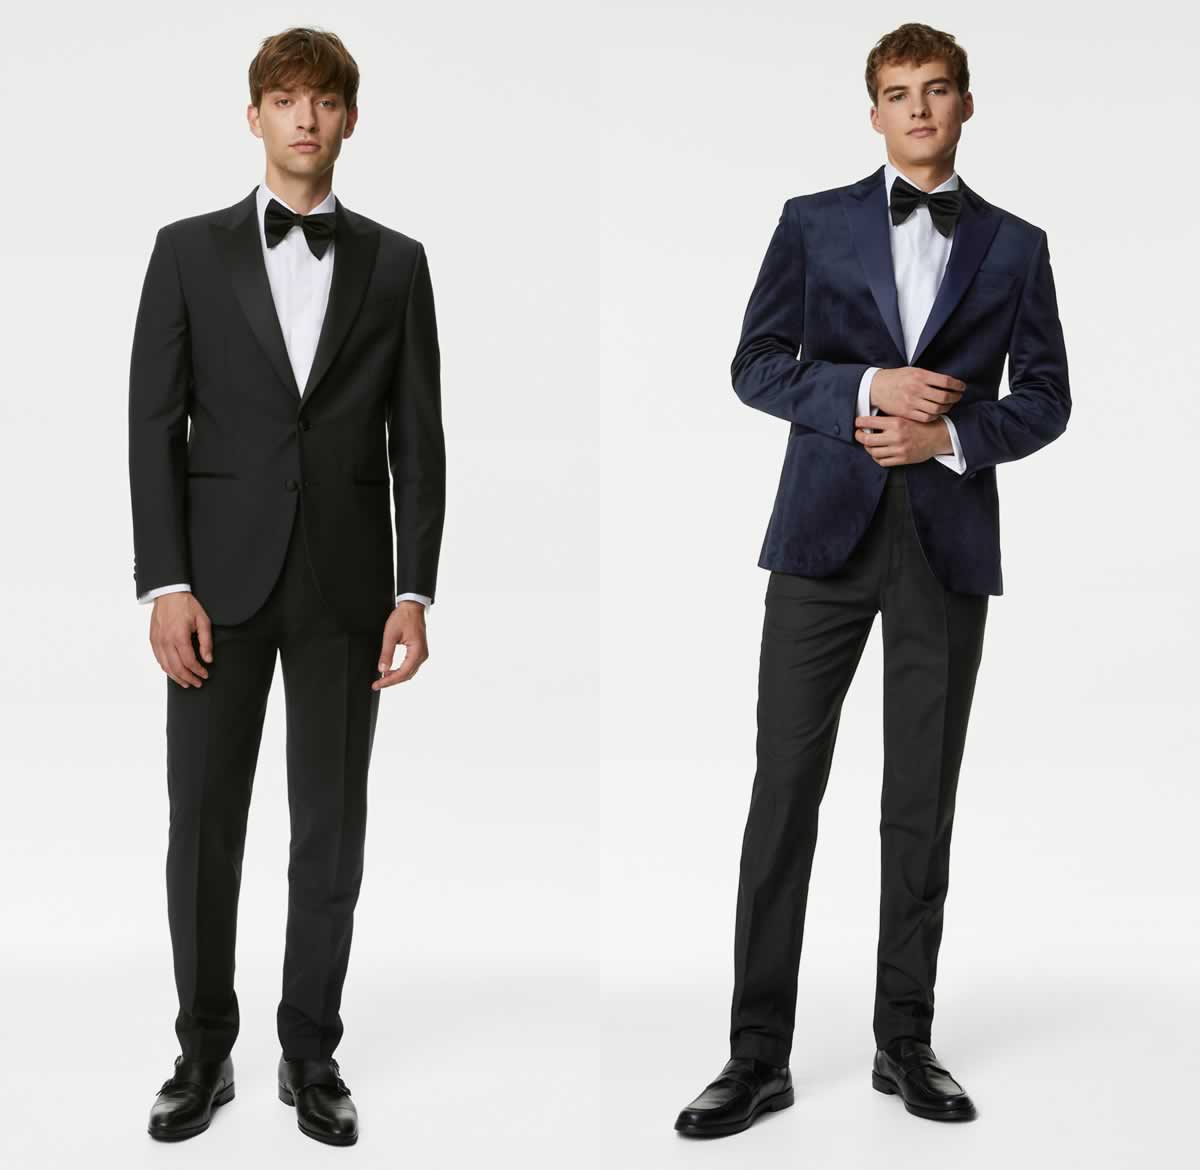 What To Wear On New Year's Eve - A Men's Outfit Guide For Going Out On ...